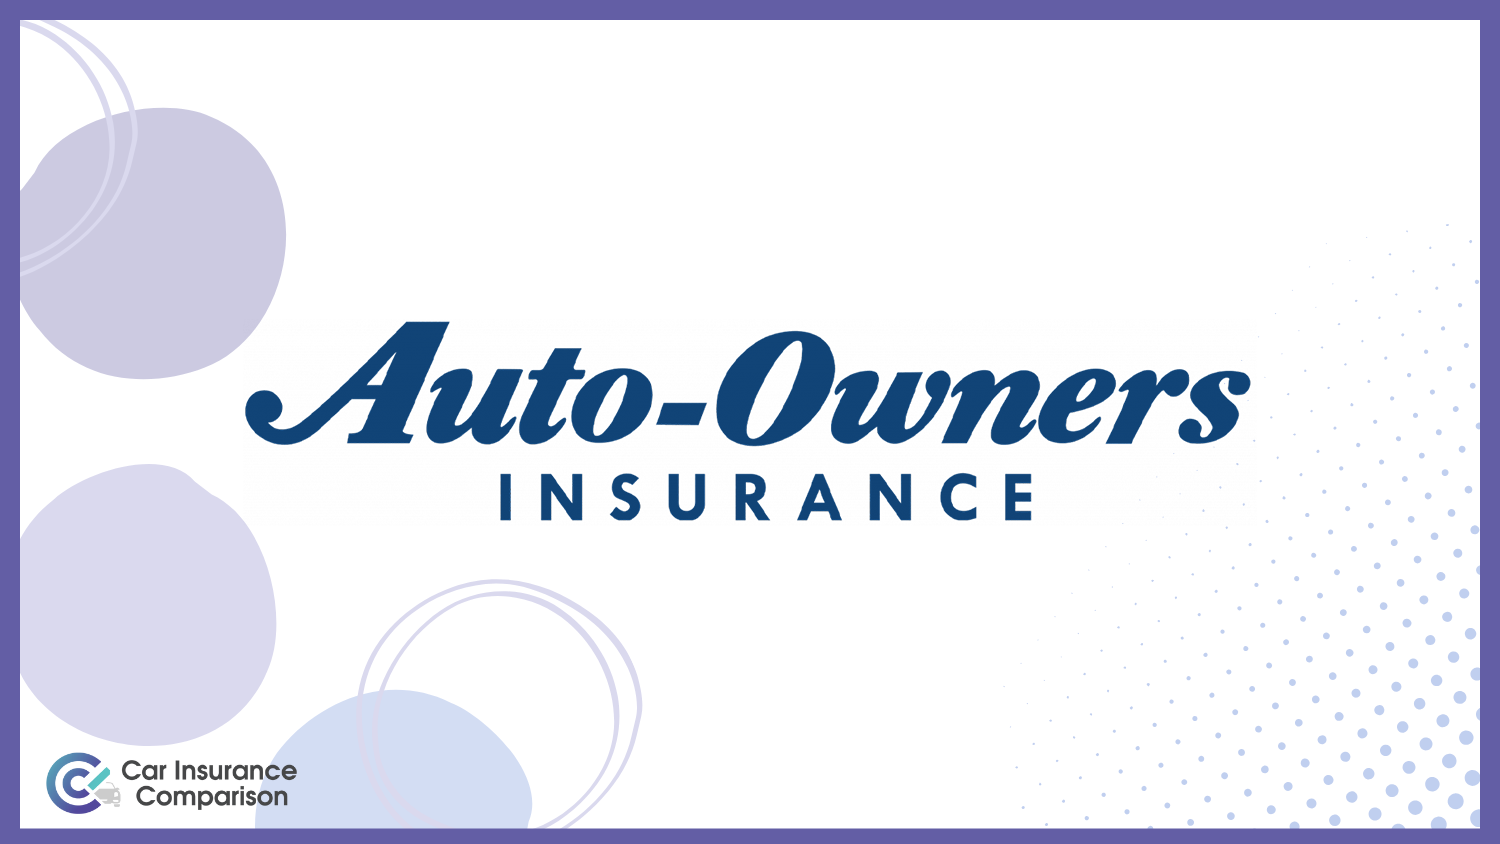 cheap car insurance for farm vehicles: Auto-owners